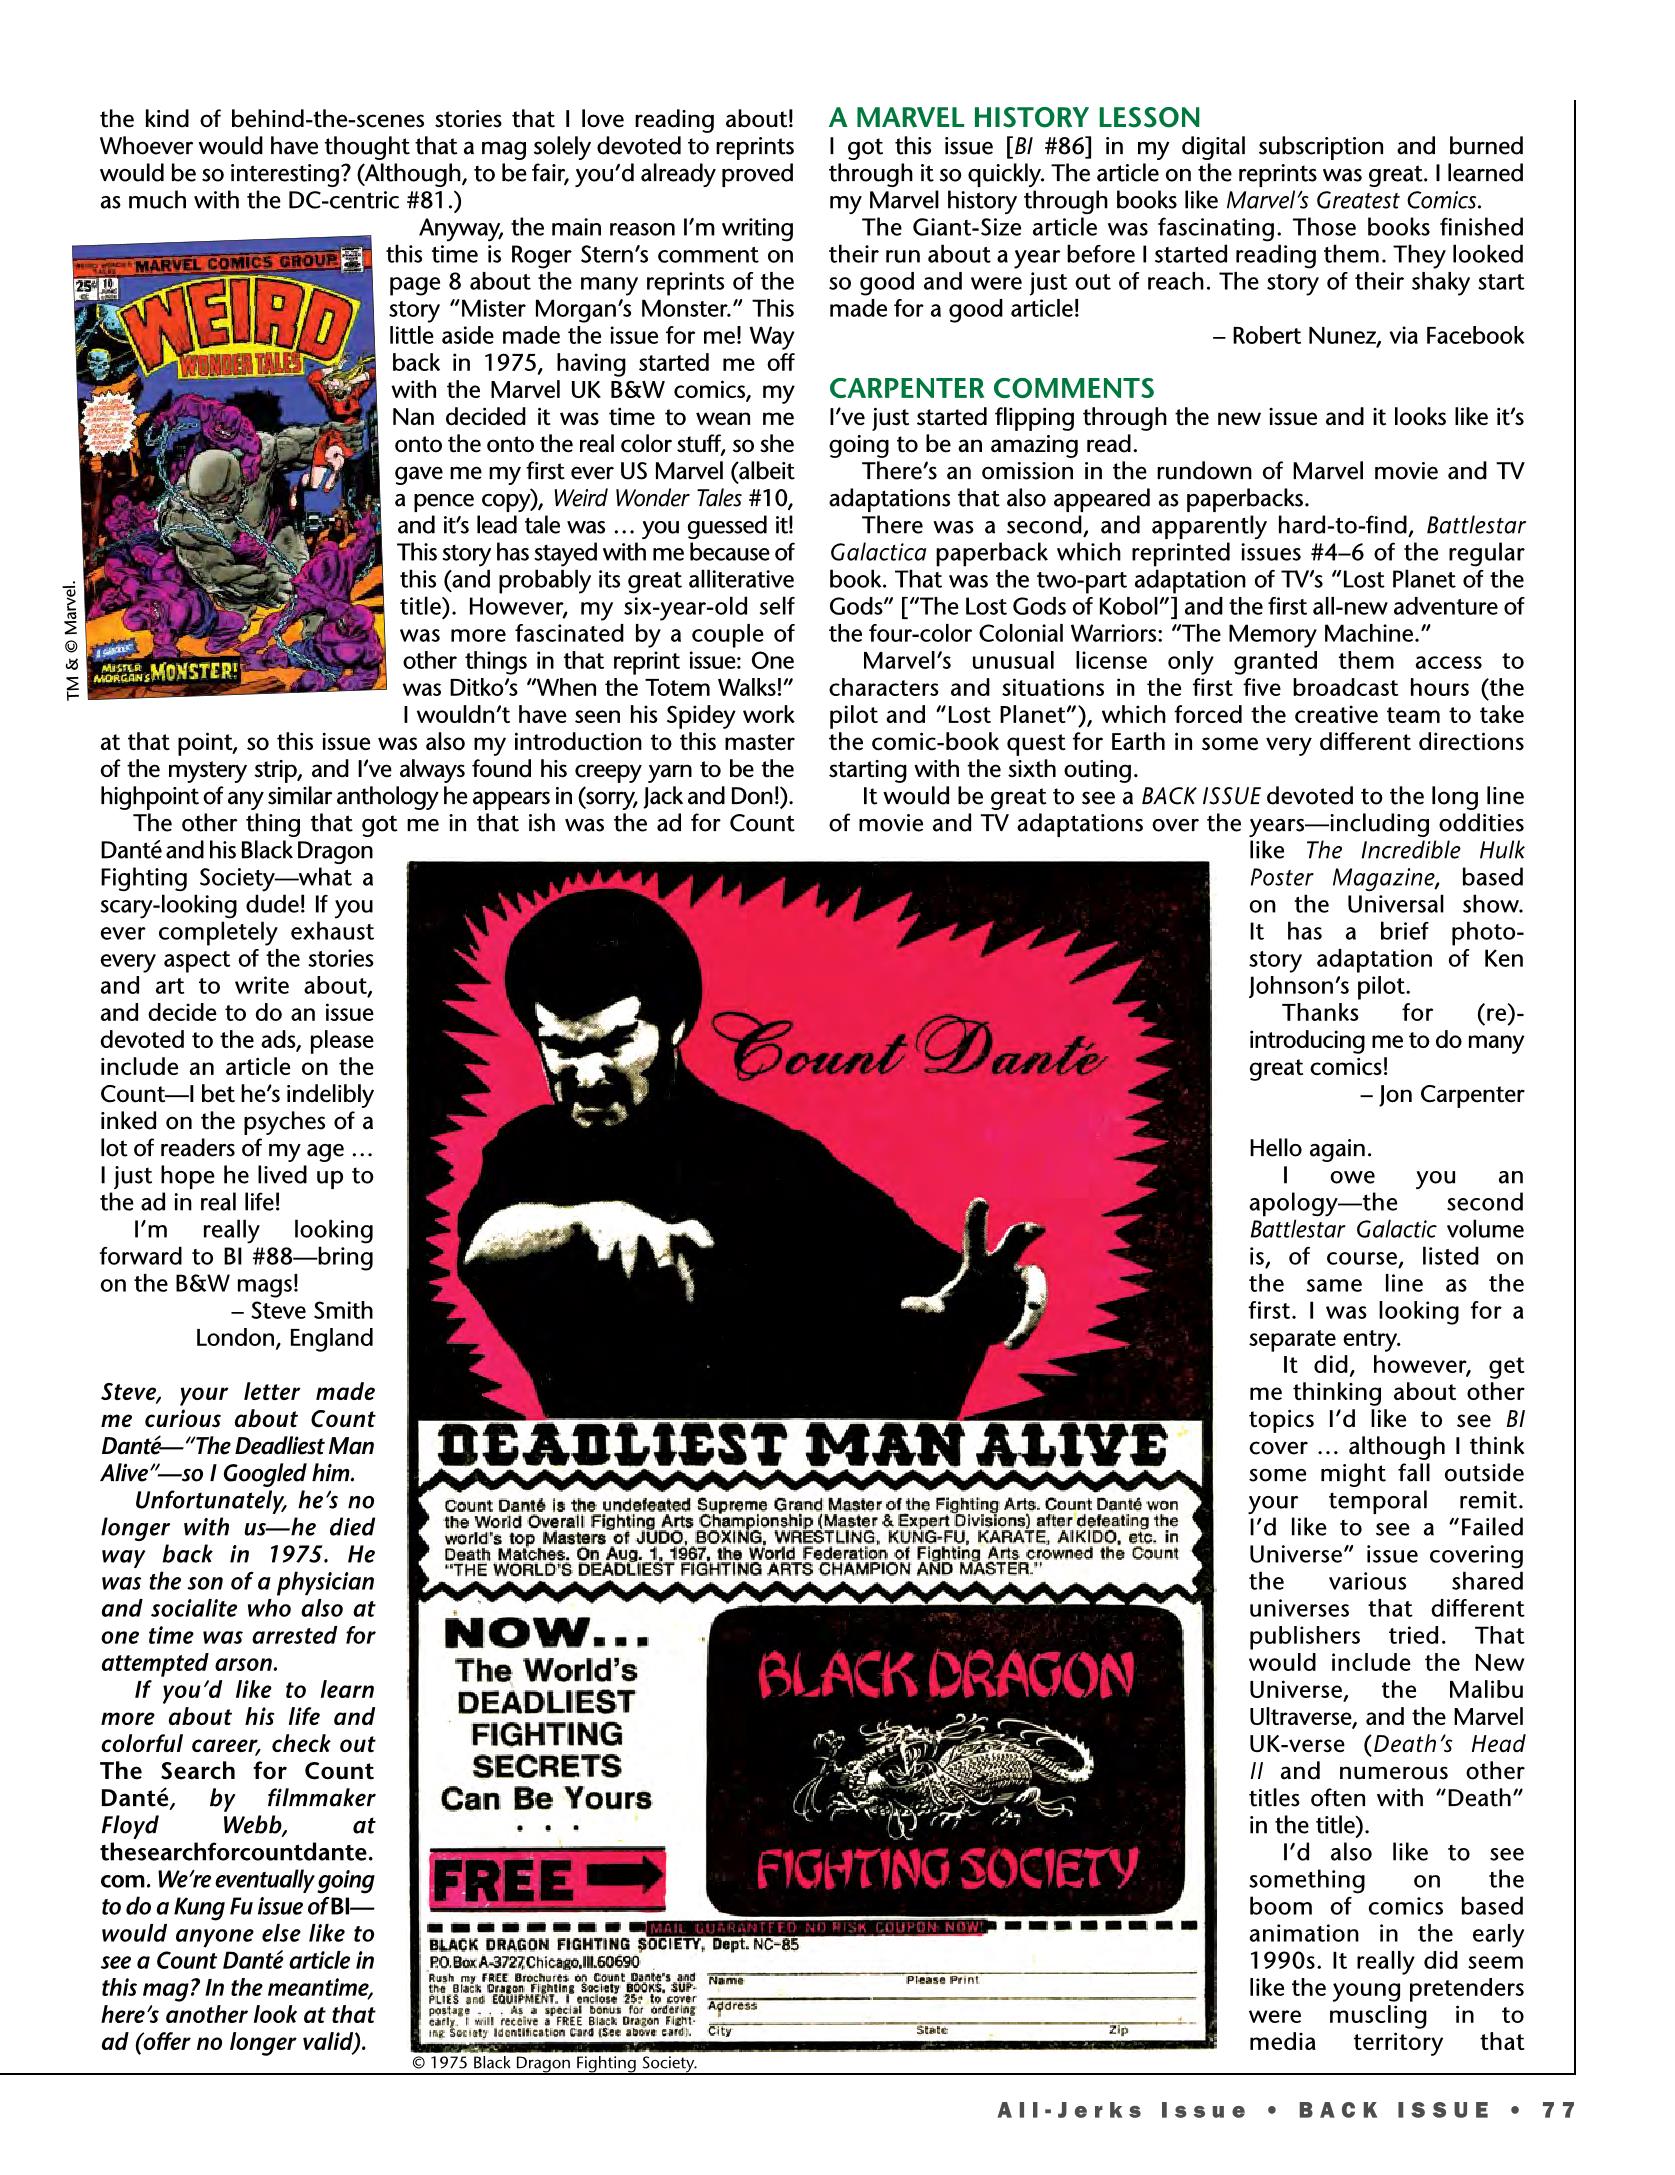 Read online Back Issue comic -  Issue #91 - 77